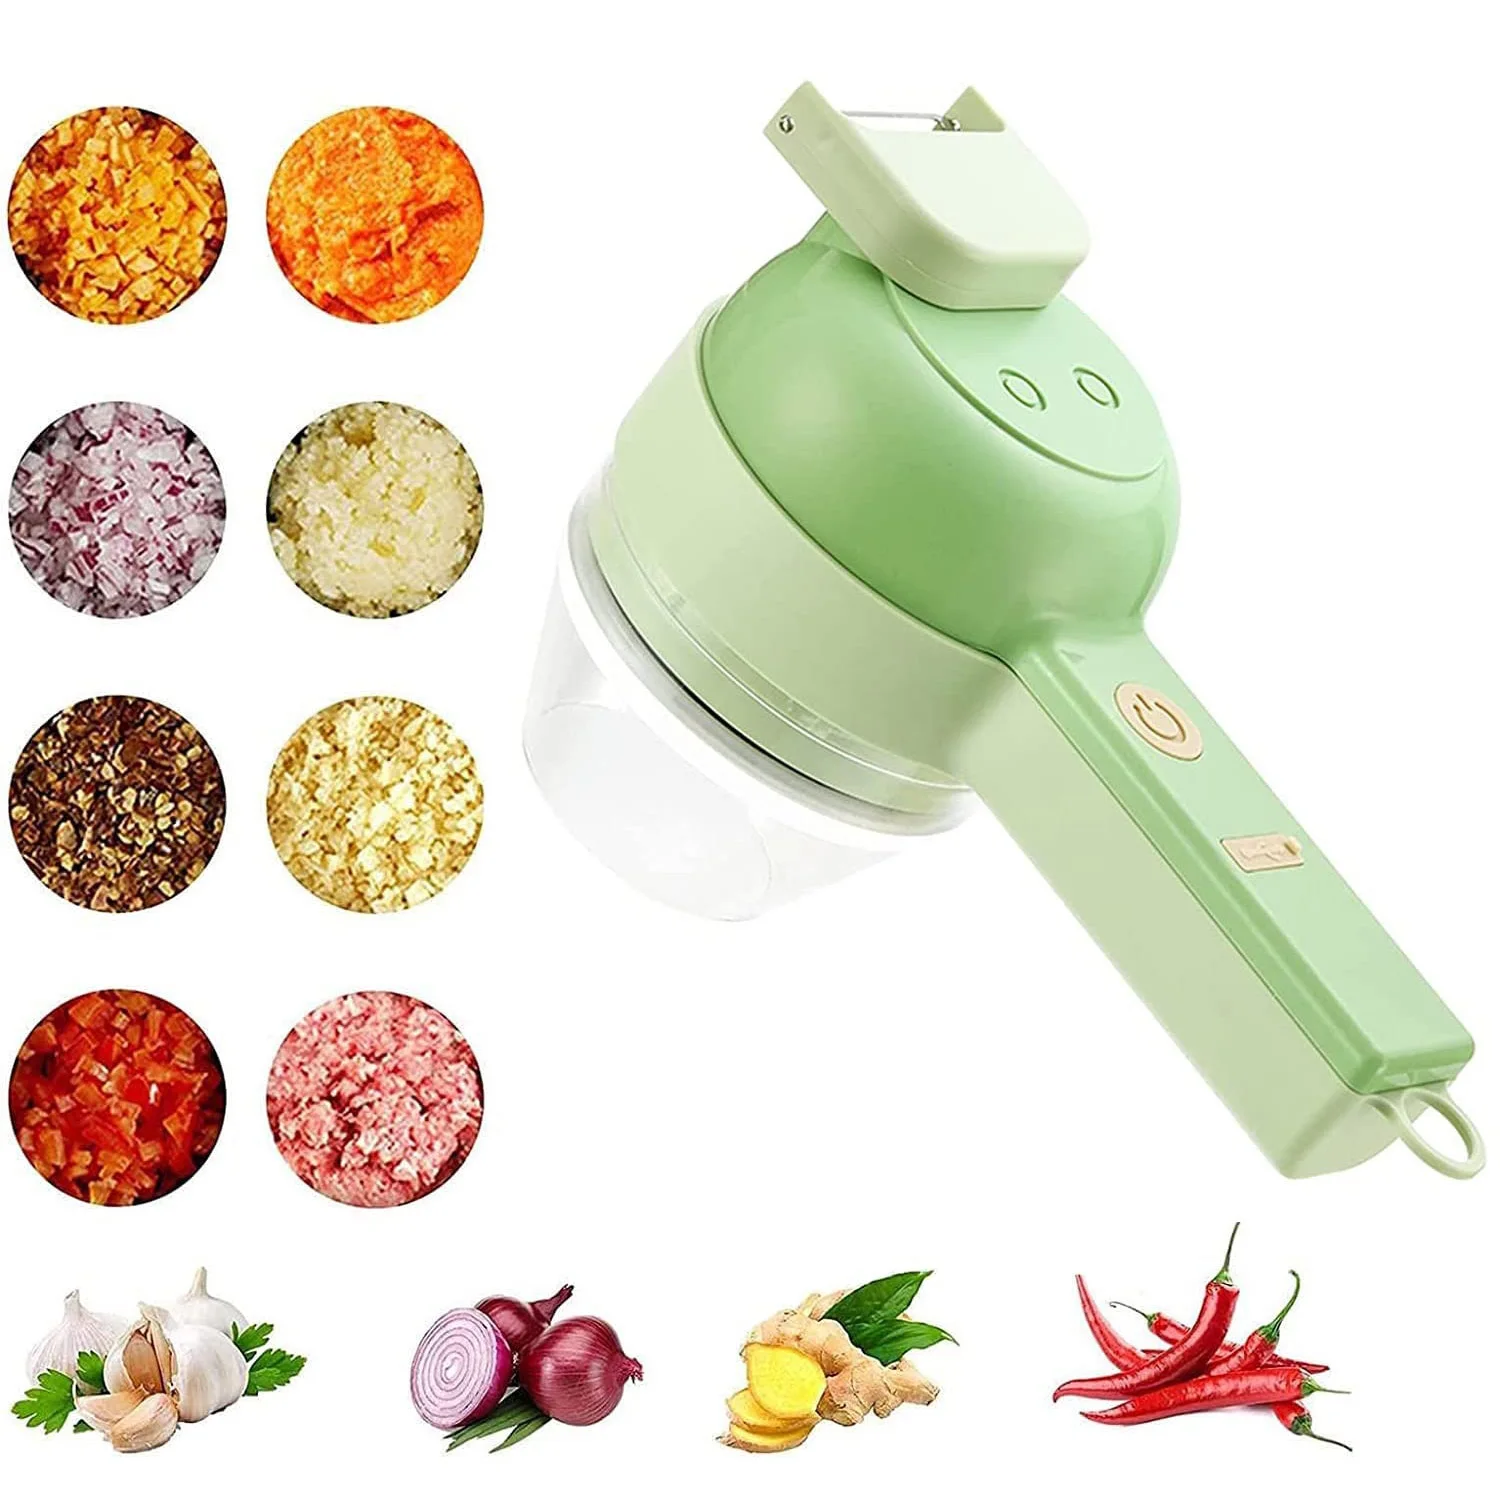 4 In 1 Handheld Multifunctional Electric Wireless Vegetable Chopper Brush Cutter for Garlic Pepper Chili Onion Celery Meat Slice